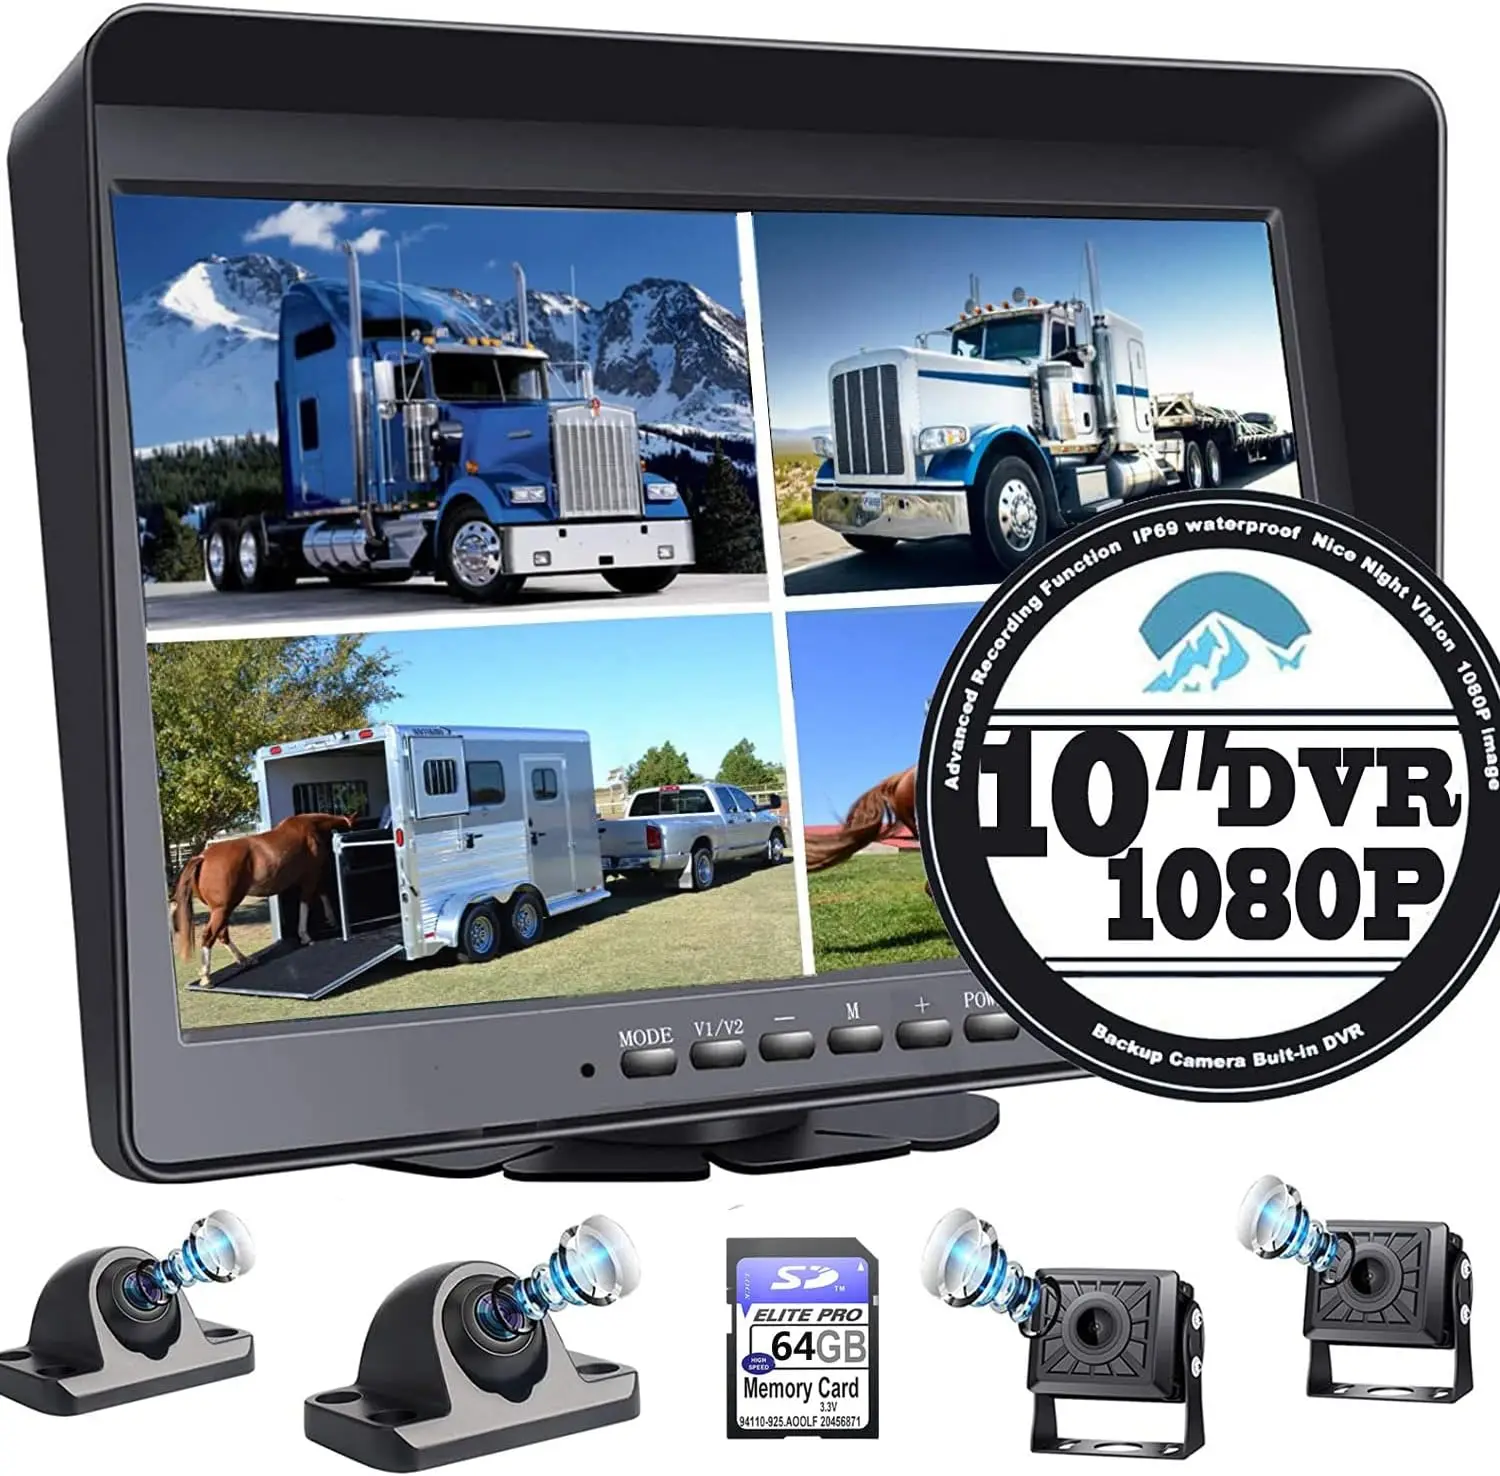 Car Backup Camera Monitor Built-in DVR for RV Truck Trailer Rear Side Front Reversing View Wired System FHD Image 4 Split Screen 3 5 inch mini tft lcd monitor 3 5 display screen car reverse backup parking monitor for car rearview rear view camera dvd